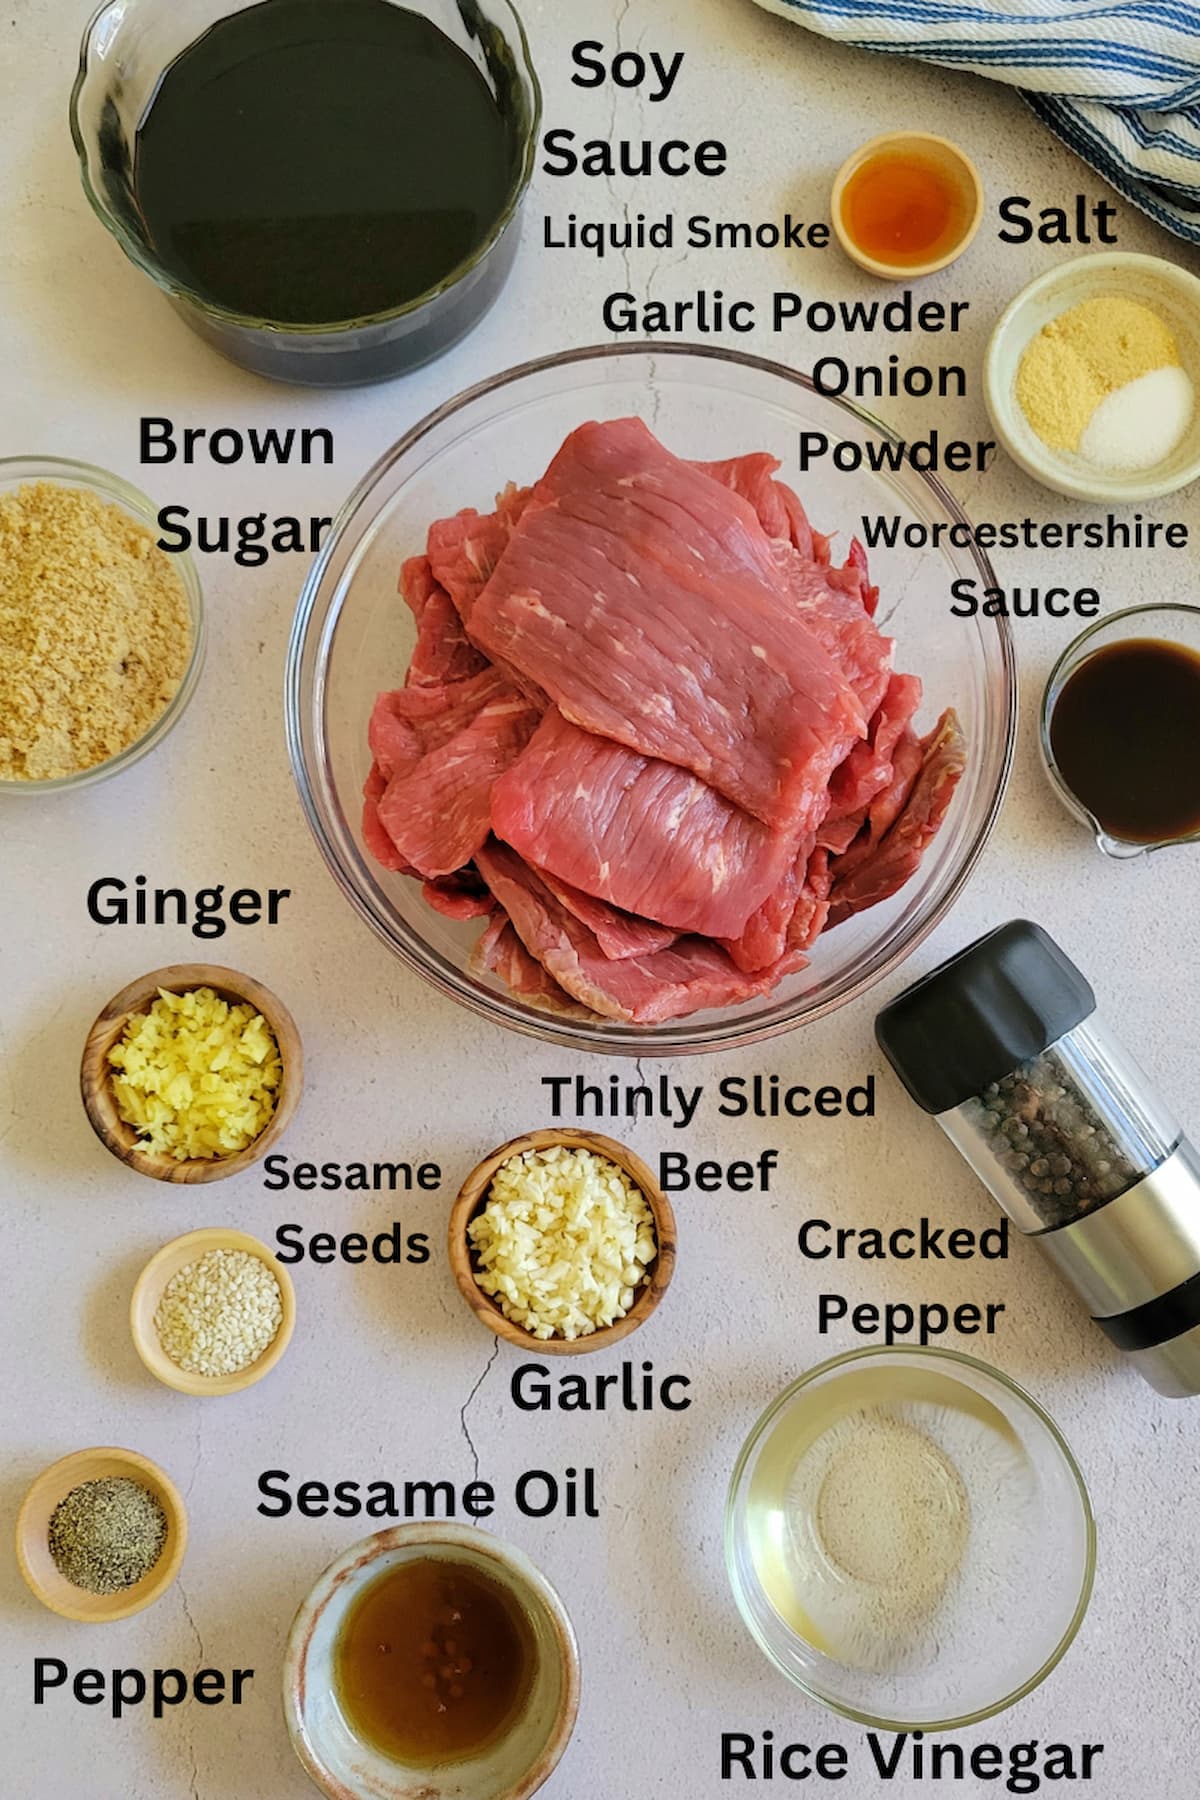 ingredients for recipe for beef jerky in a dehydrator - thinly sliced beef, soy sauce, liquid smoke, salt, onion powder, garlic powder, worcestershire sauce, brown sugar, pepper, cracked pepper, sesame seeds, sesame oil, ginger, garlic, rice vinegar